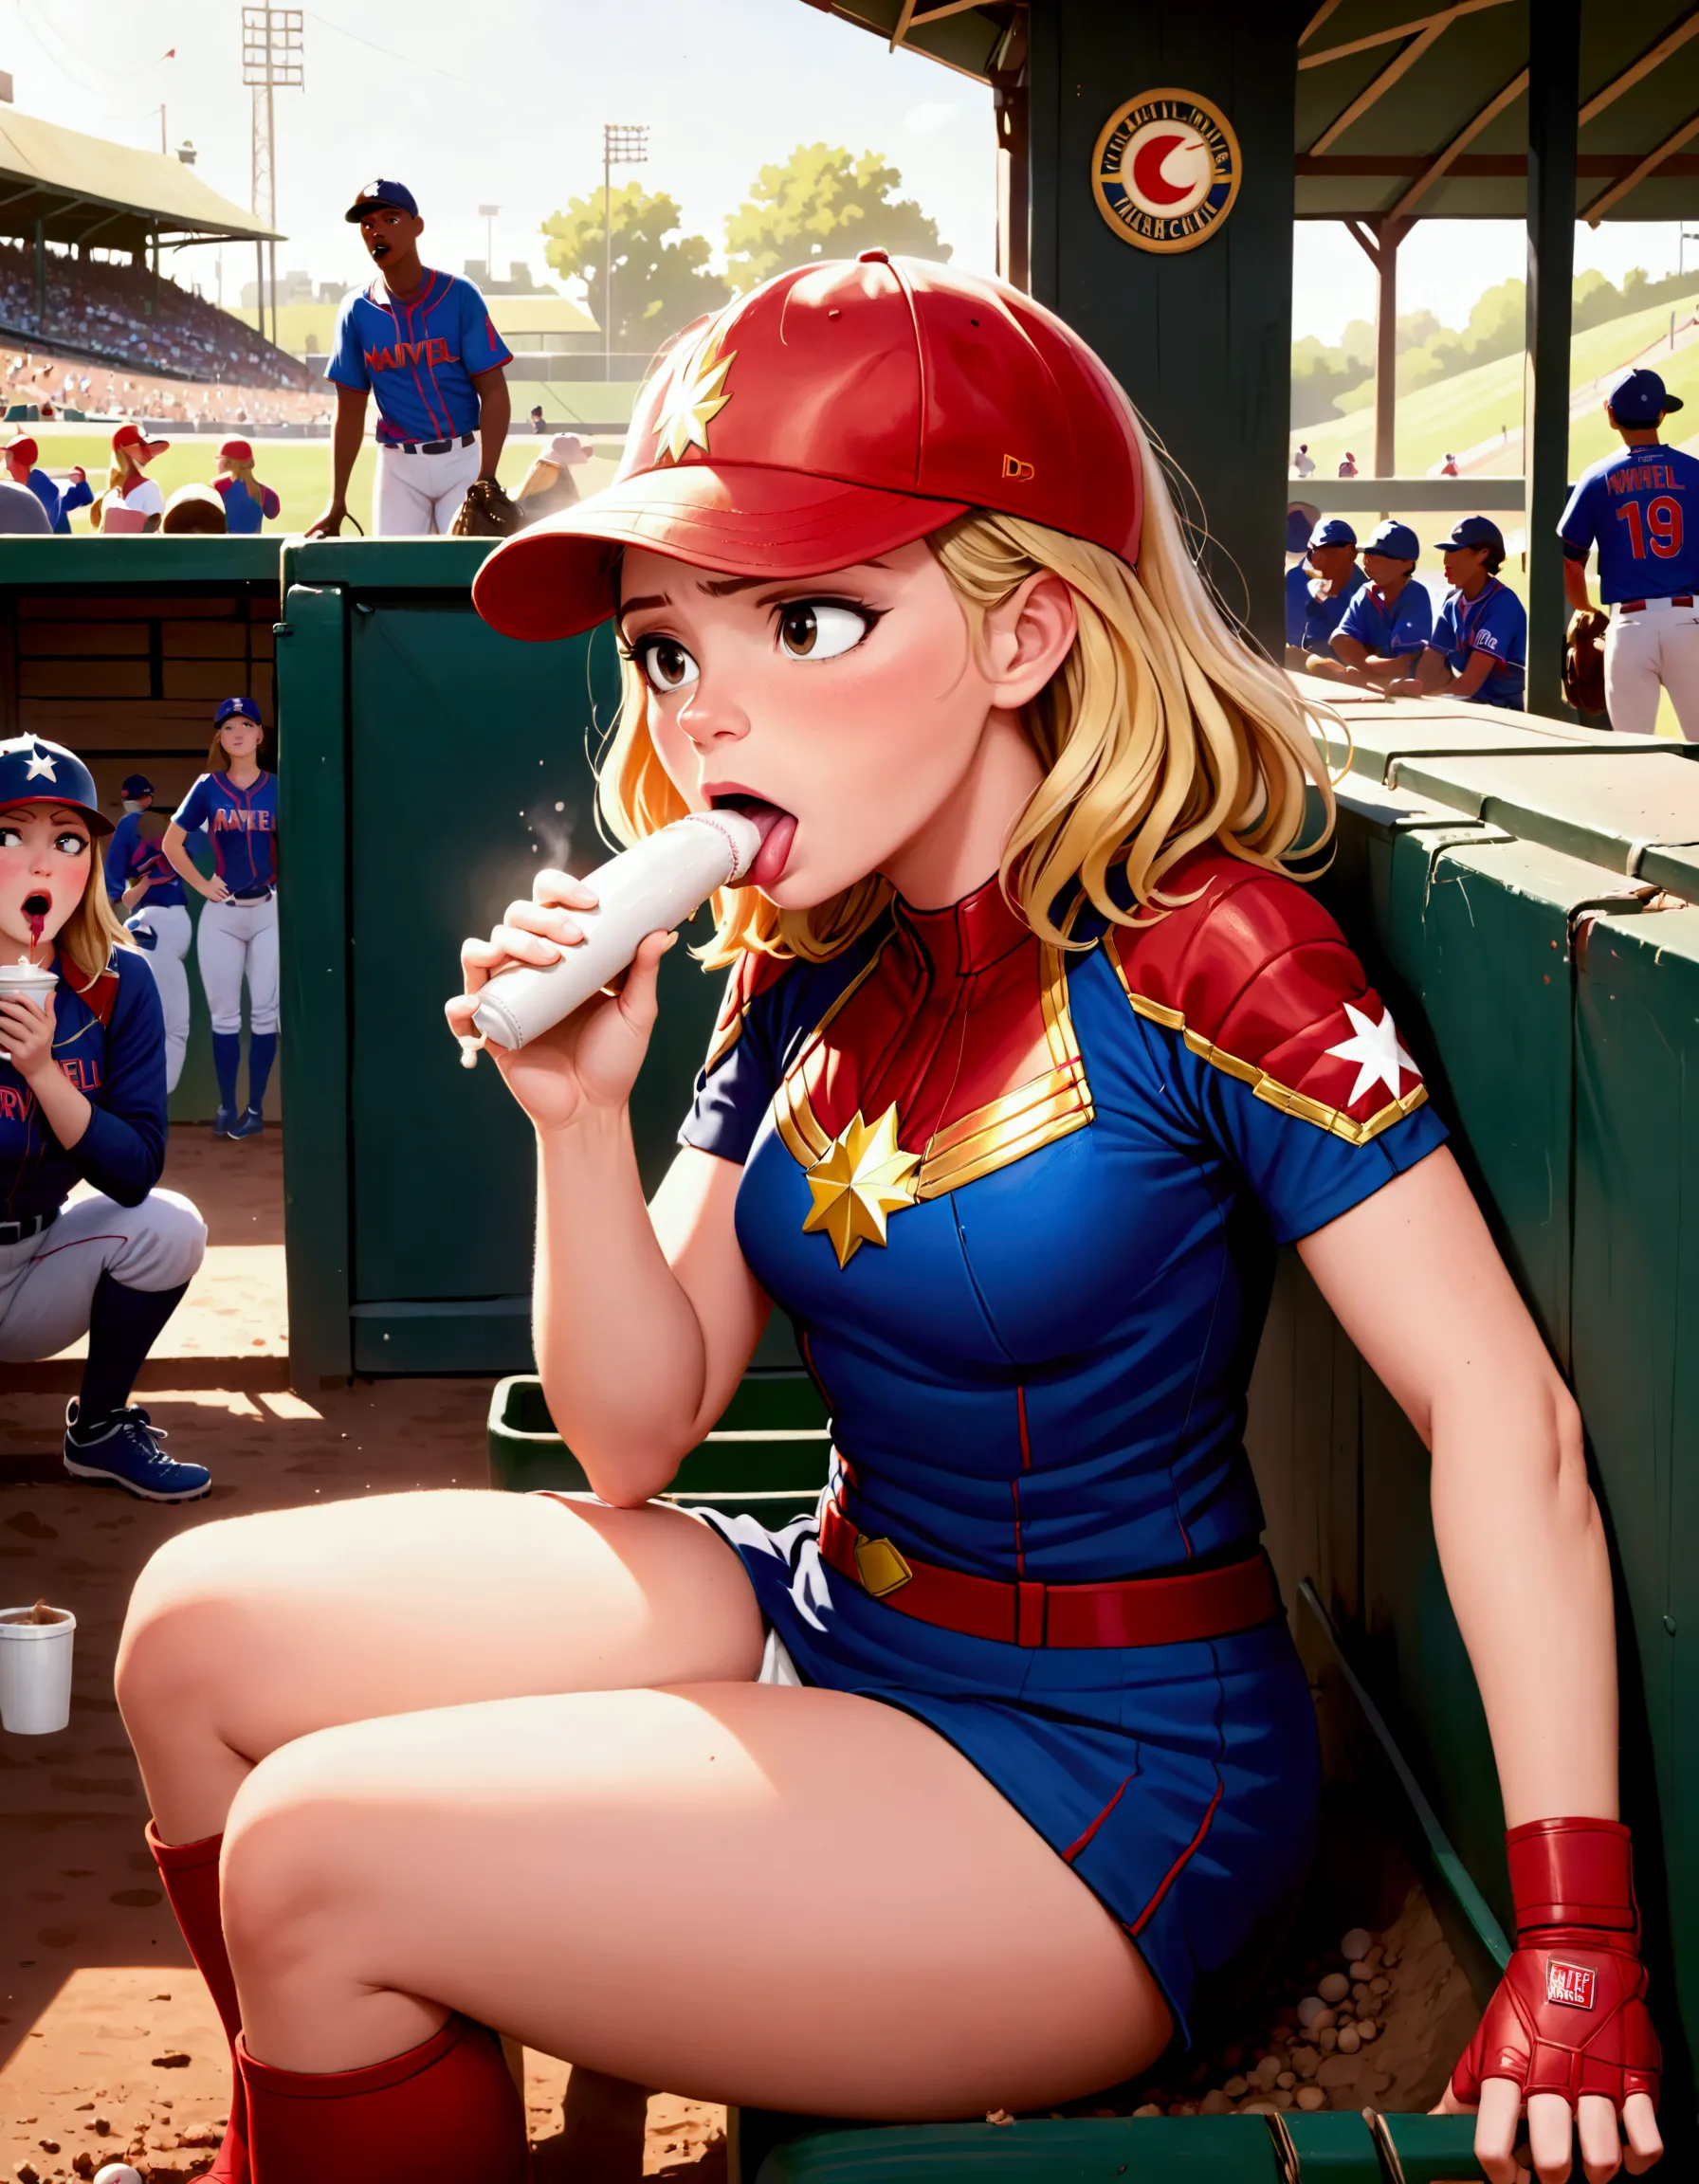 (Brea Larson, age 25, Captain Marvel, baseball cap, chewing tobacco) she is sitting in the baseball dug out spitting into a cup,...